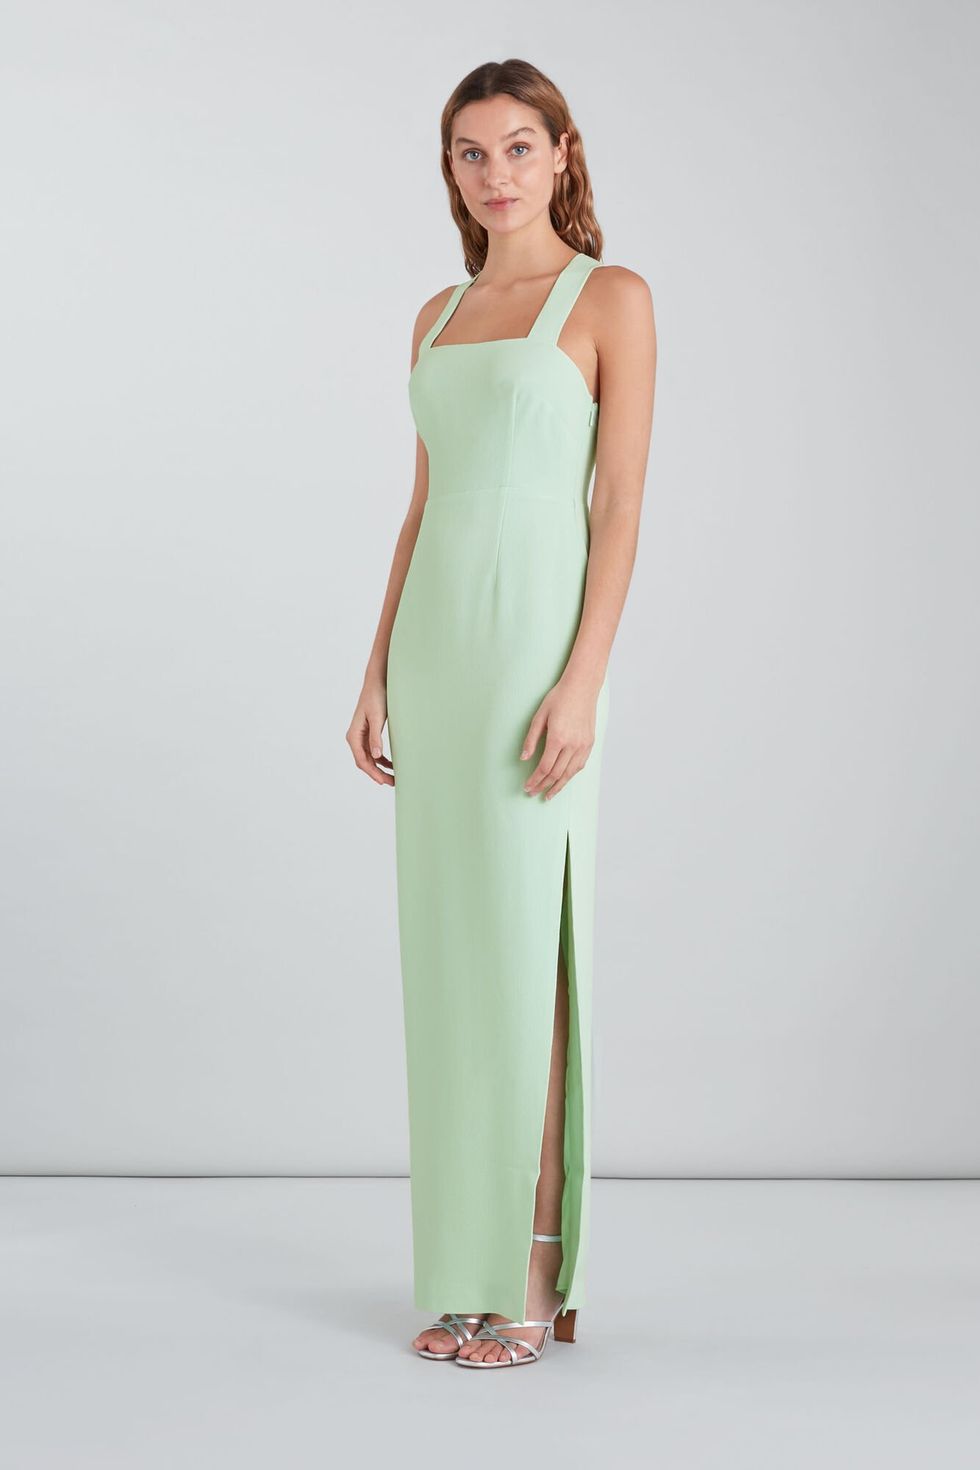 model wearing mint green floor length 90s strap style dress with silver strappy sandals